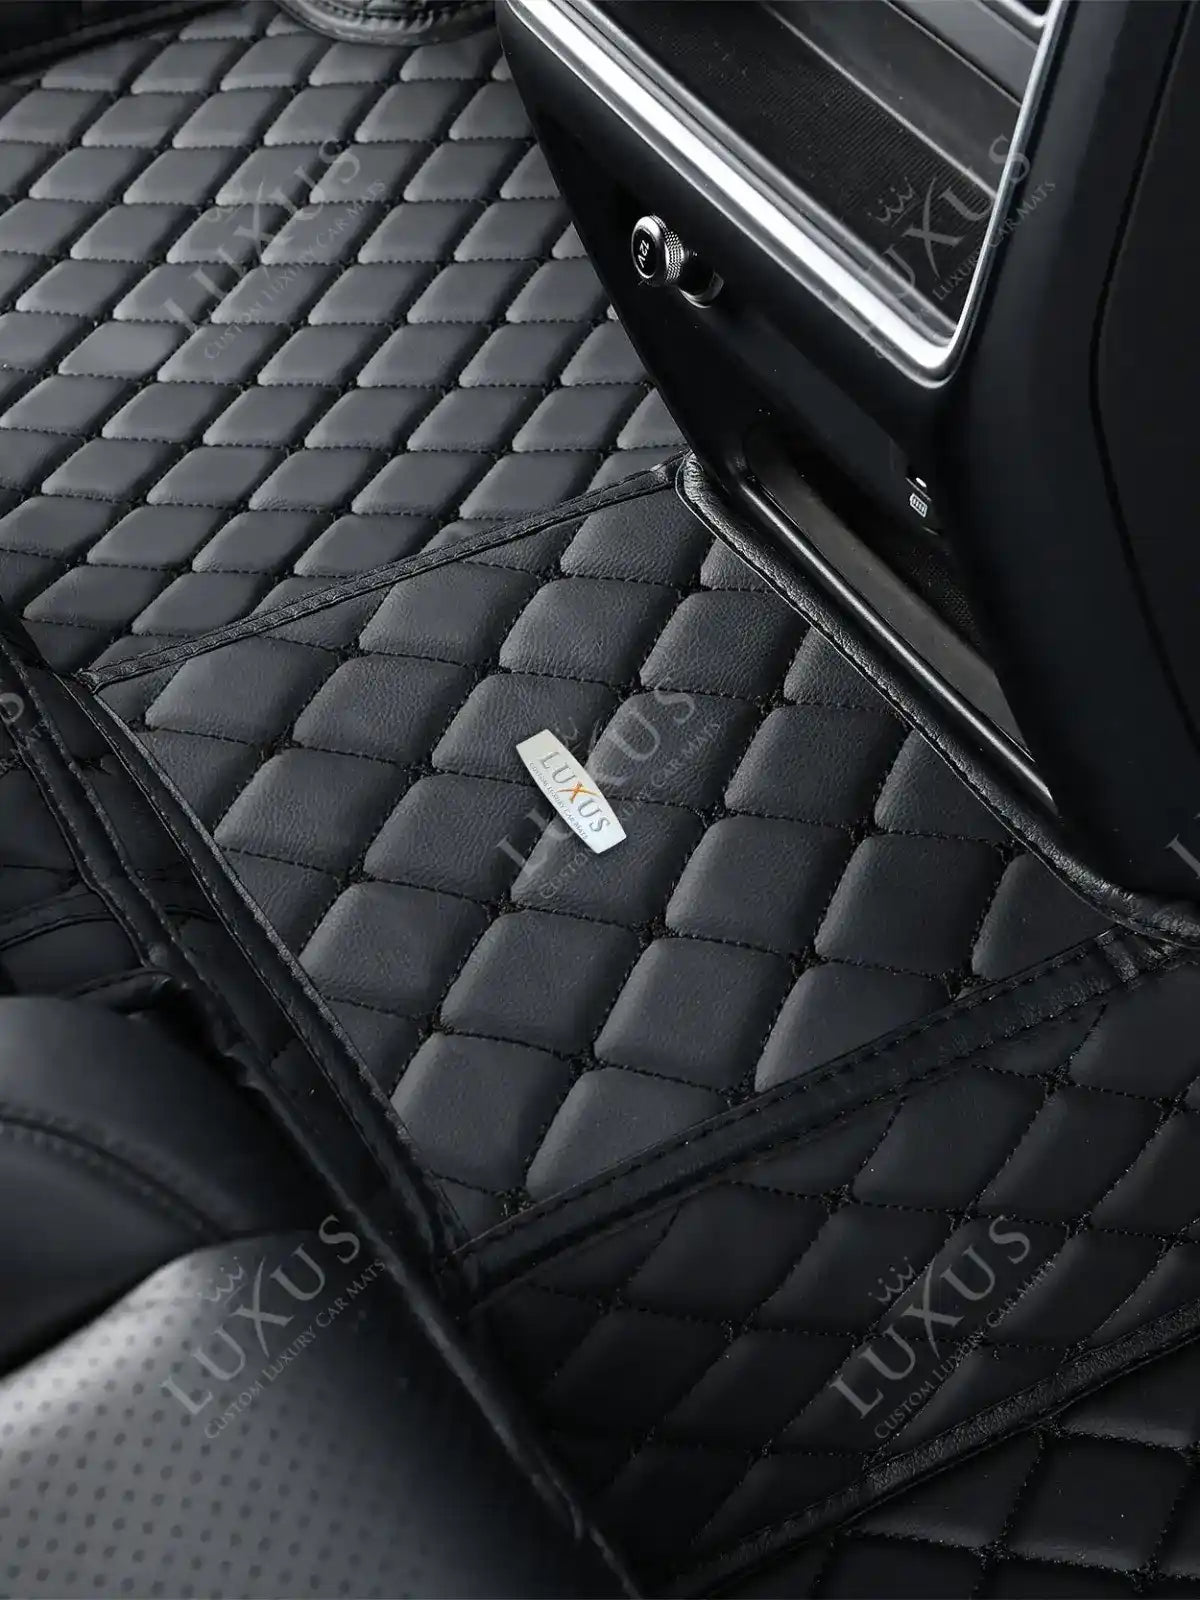 Trunk Mats For Car, Truck & SUV Luxus Car Mats Custom All-Weather  Waterproof Diamond Auto Boot Liner Carpets Rugs Black Stitching